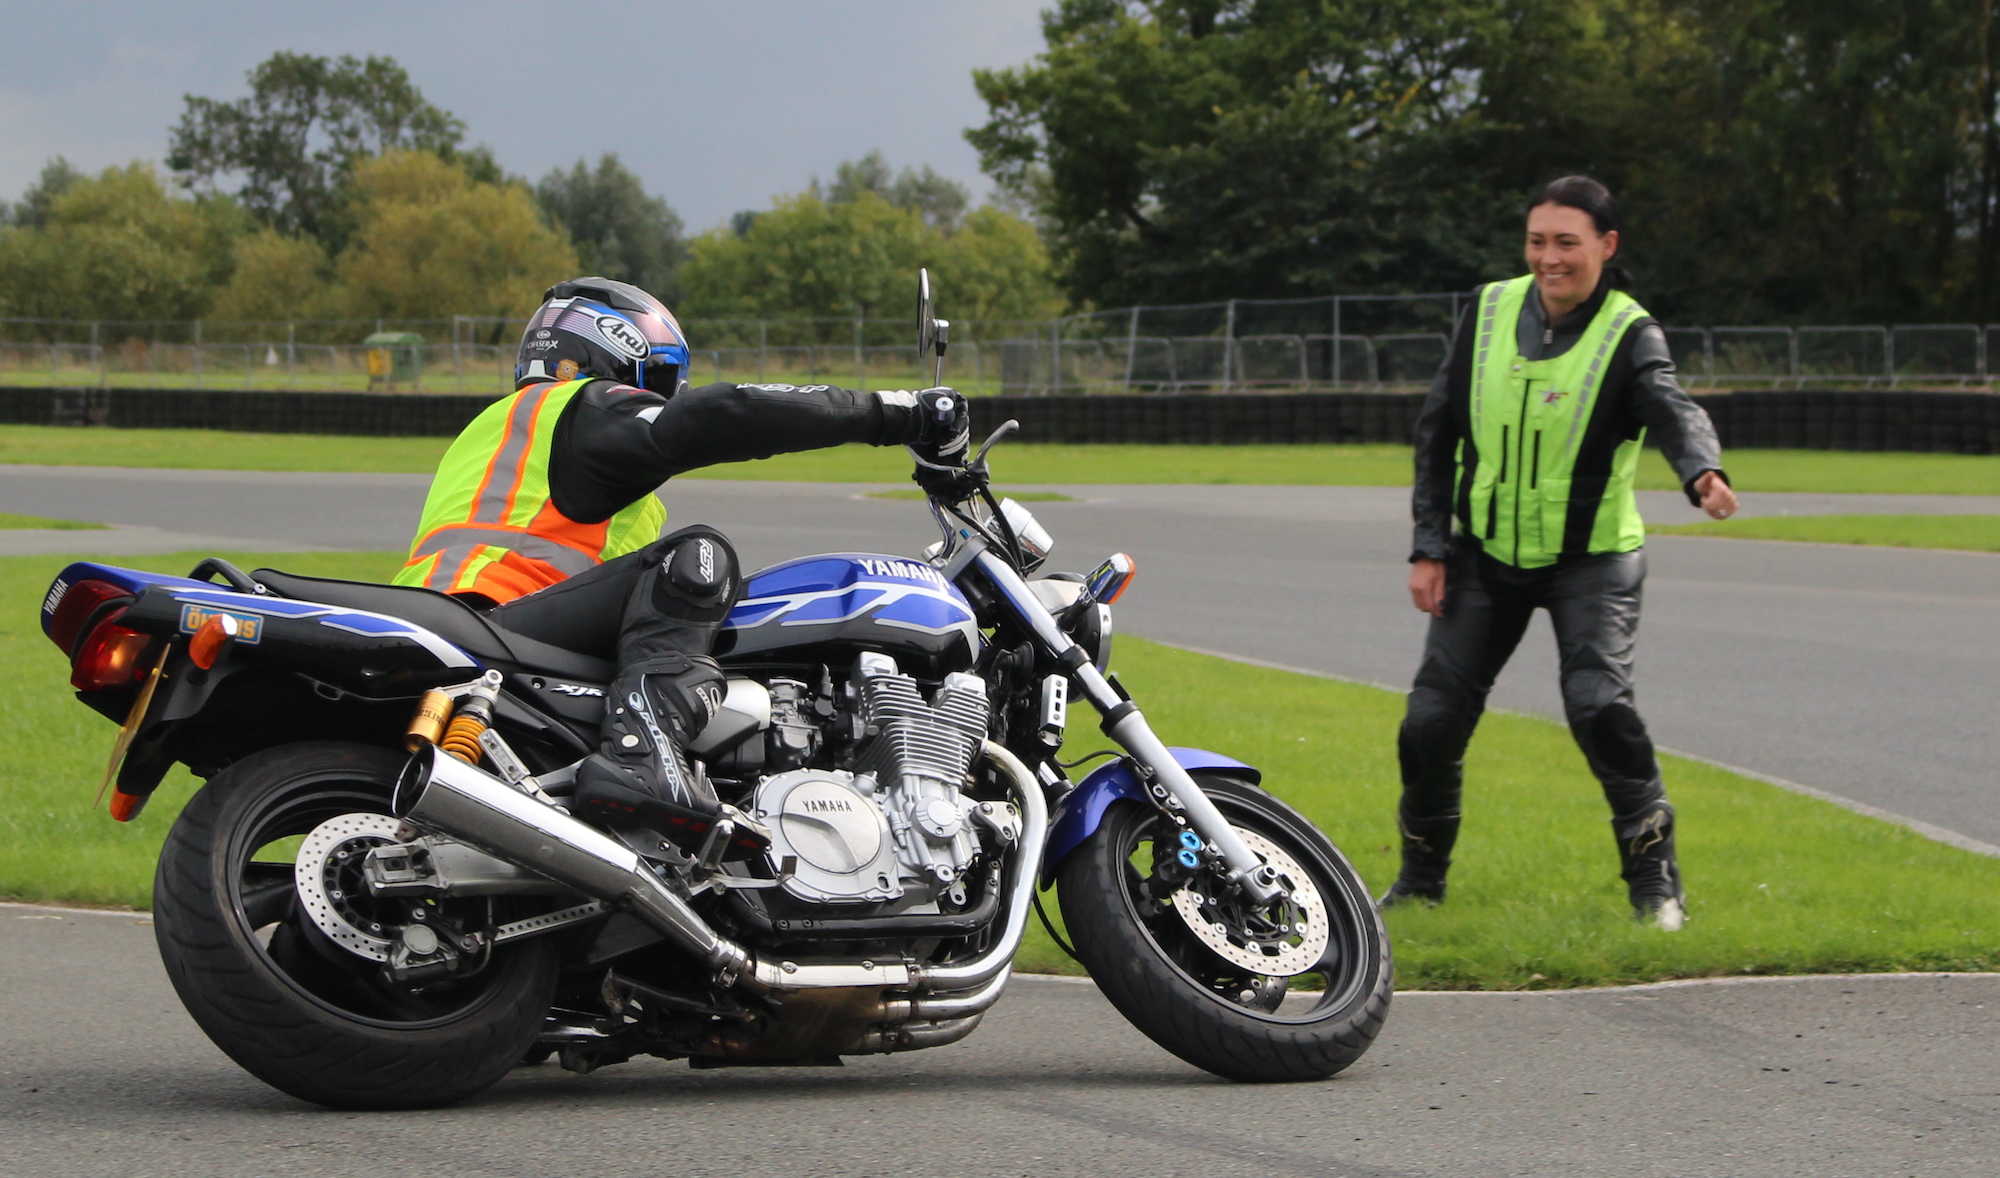  Direct Access Motorcycle training Leicester, Luton, London, Milton Keynes, Reading, Oxford, CBT Motorcycle test